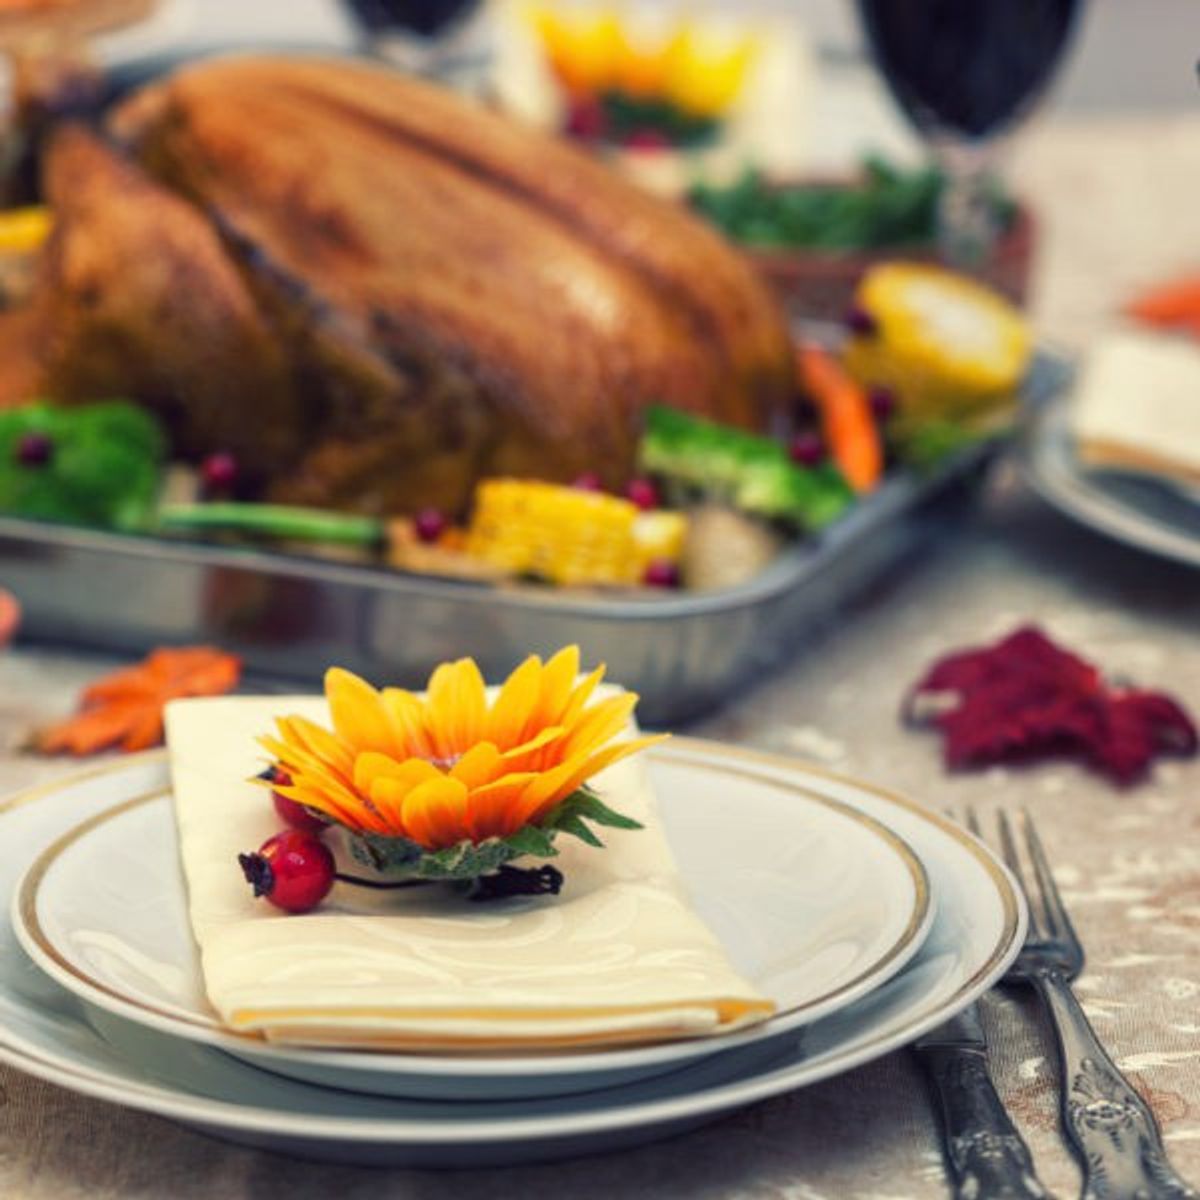 Best Thanksgiving Dishes and Recipes